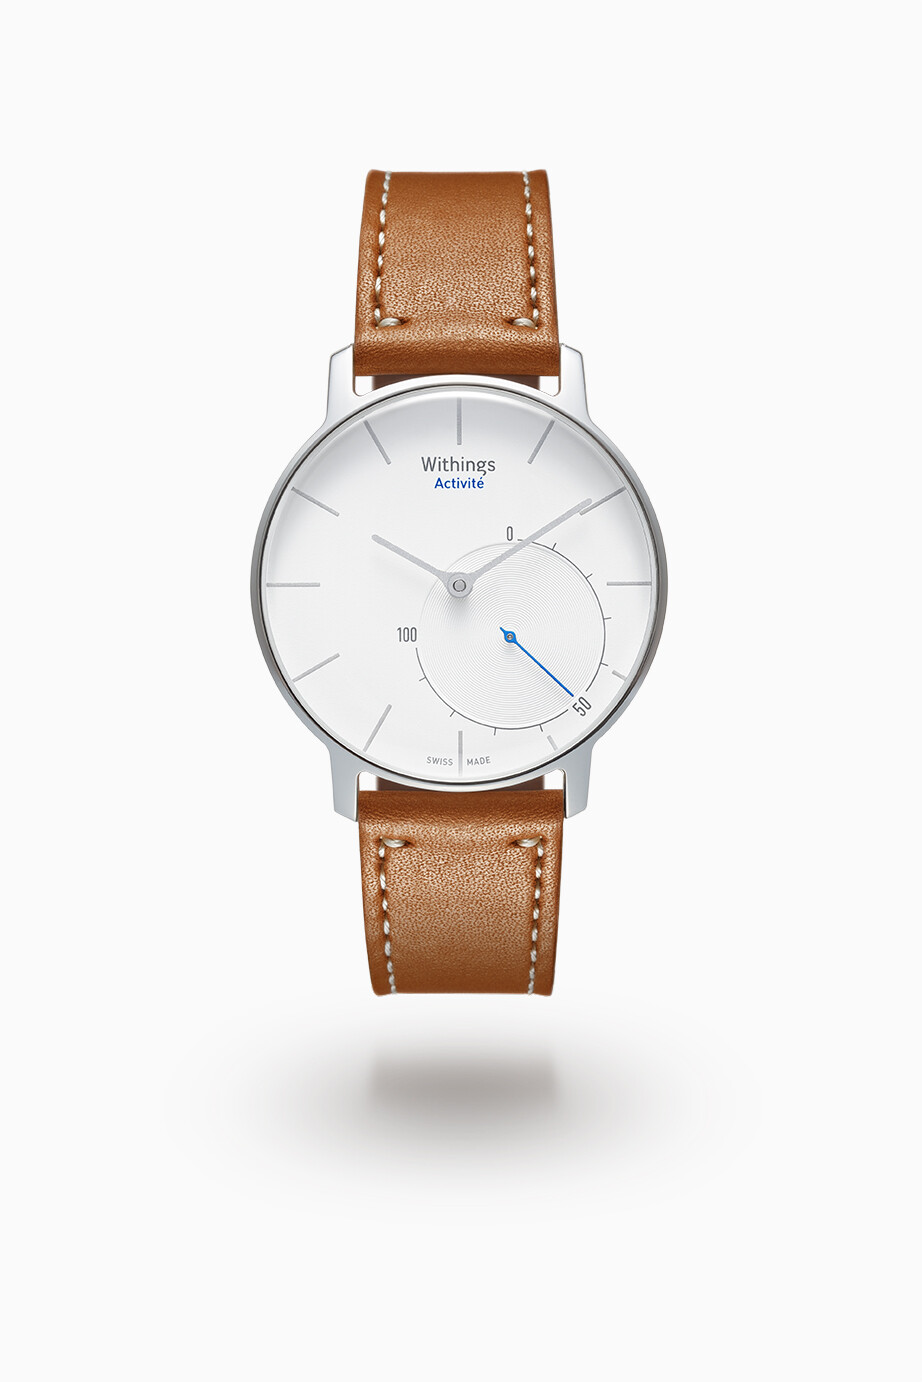 2.Withings_Activité_silver_front